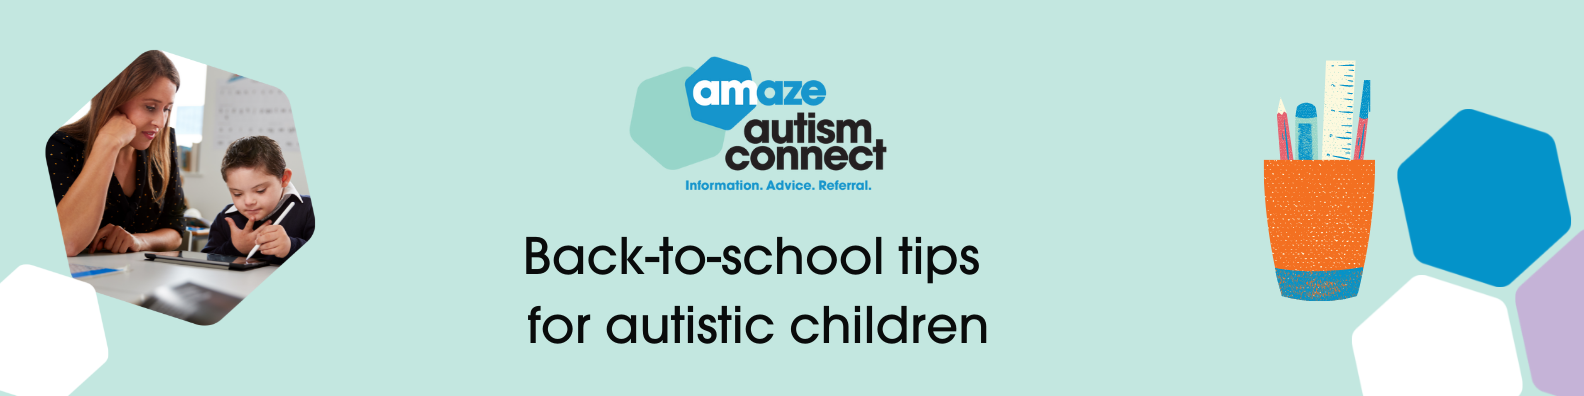 Image of a teacher and child in uniform. Text reads "Back to school tips for autistic children"